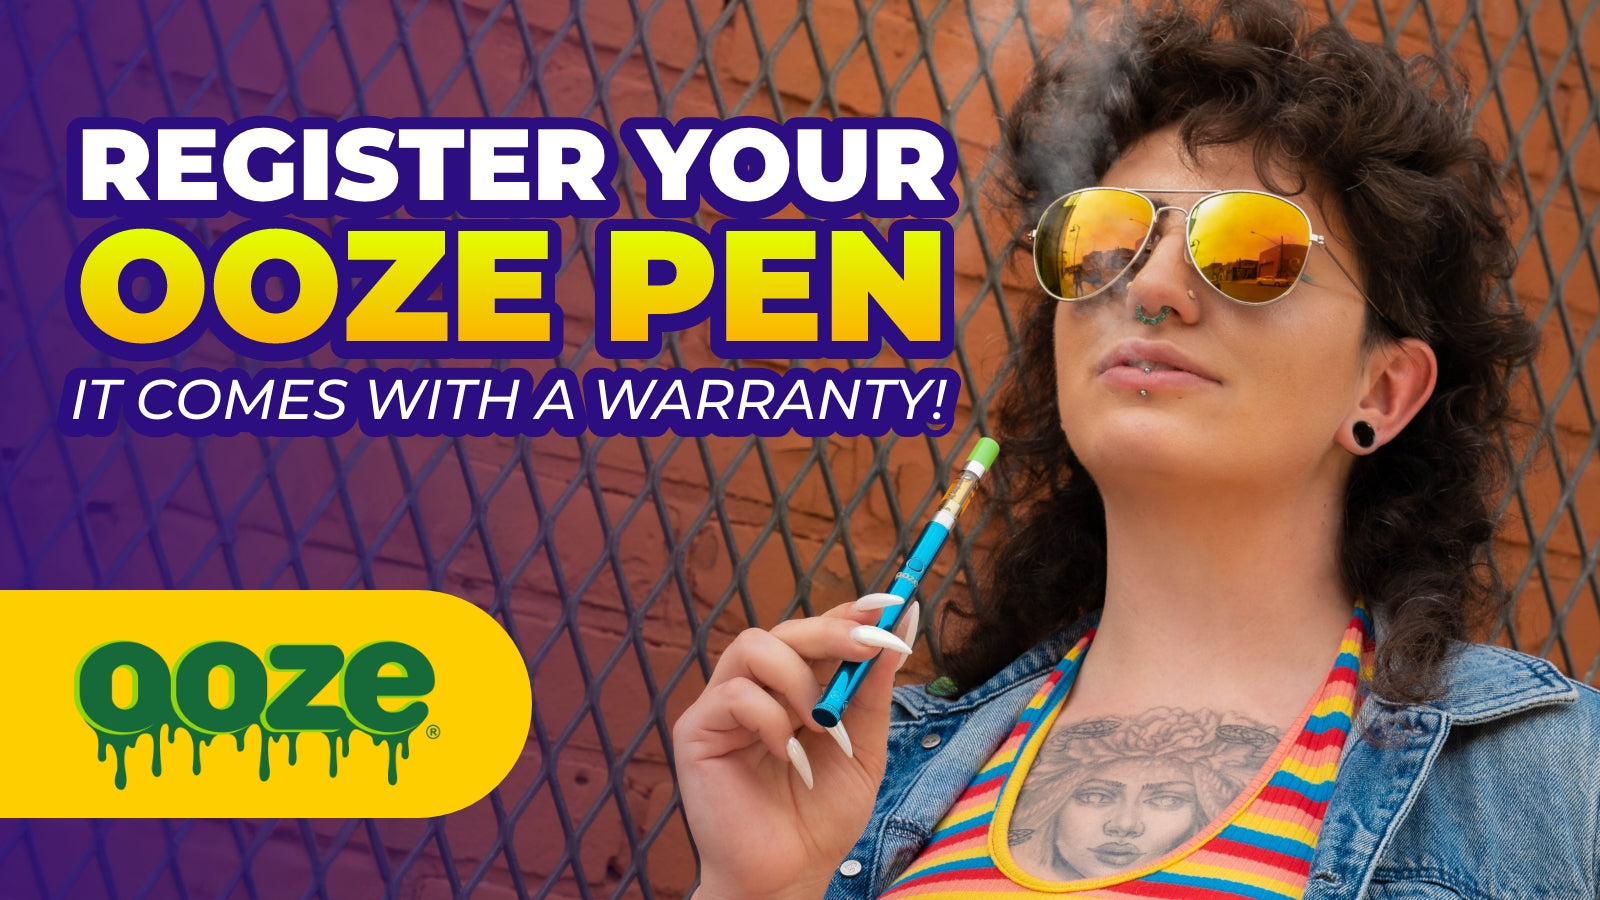 Register Your Ooze Pen, It Comes With a Warranty!